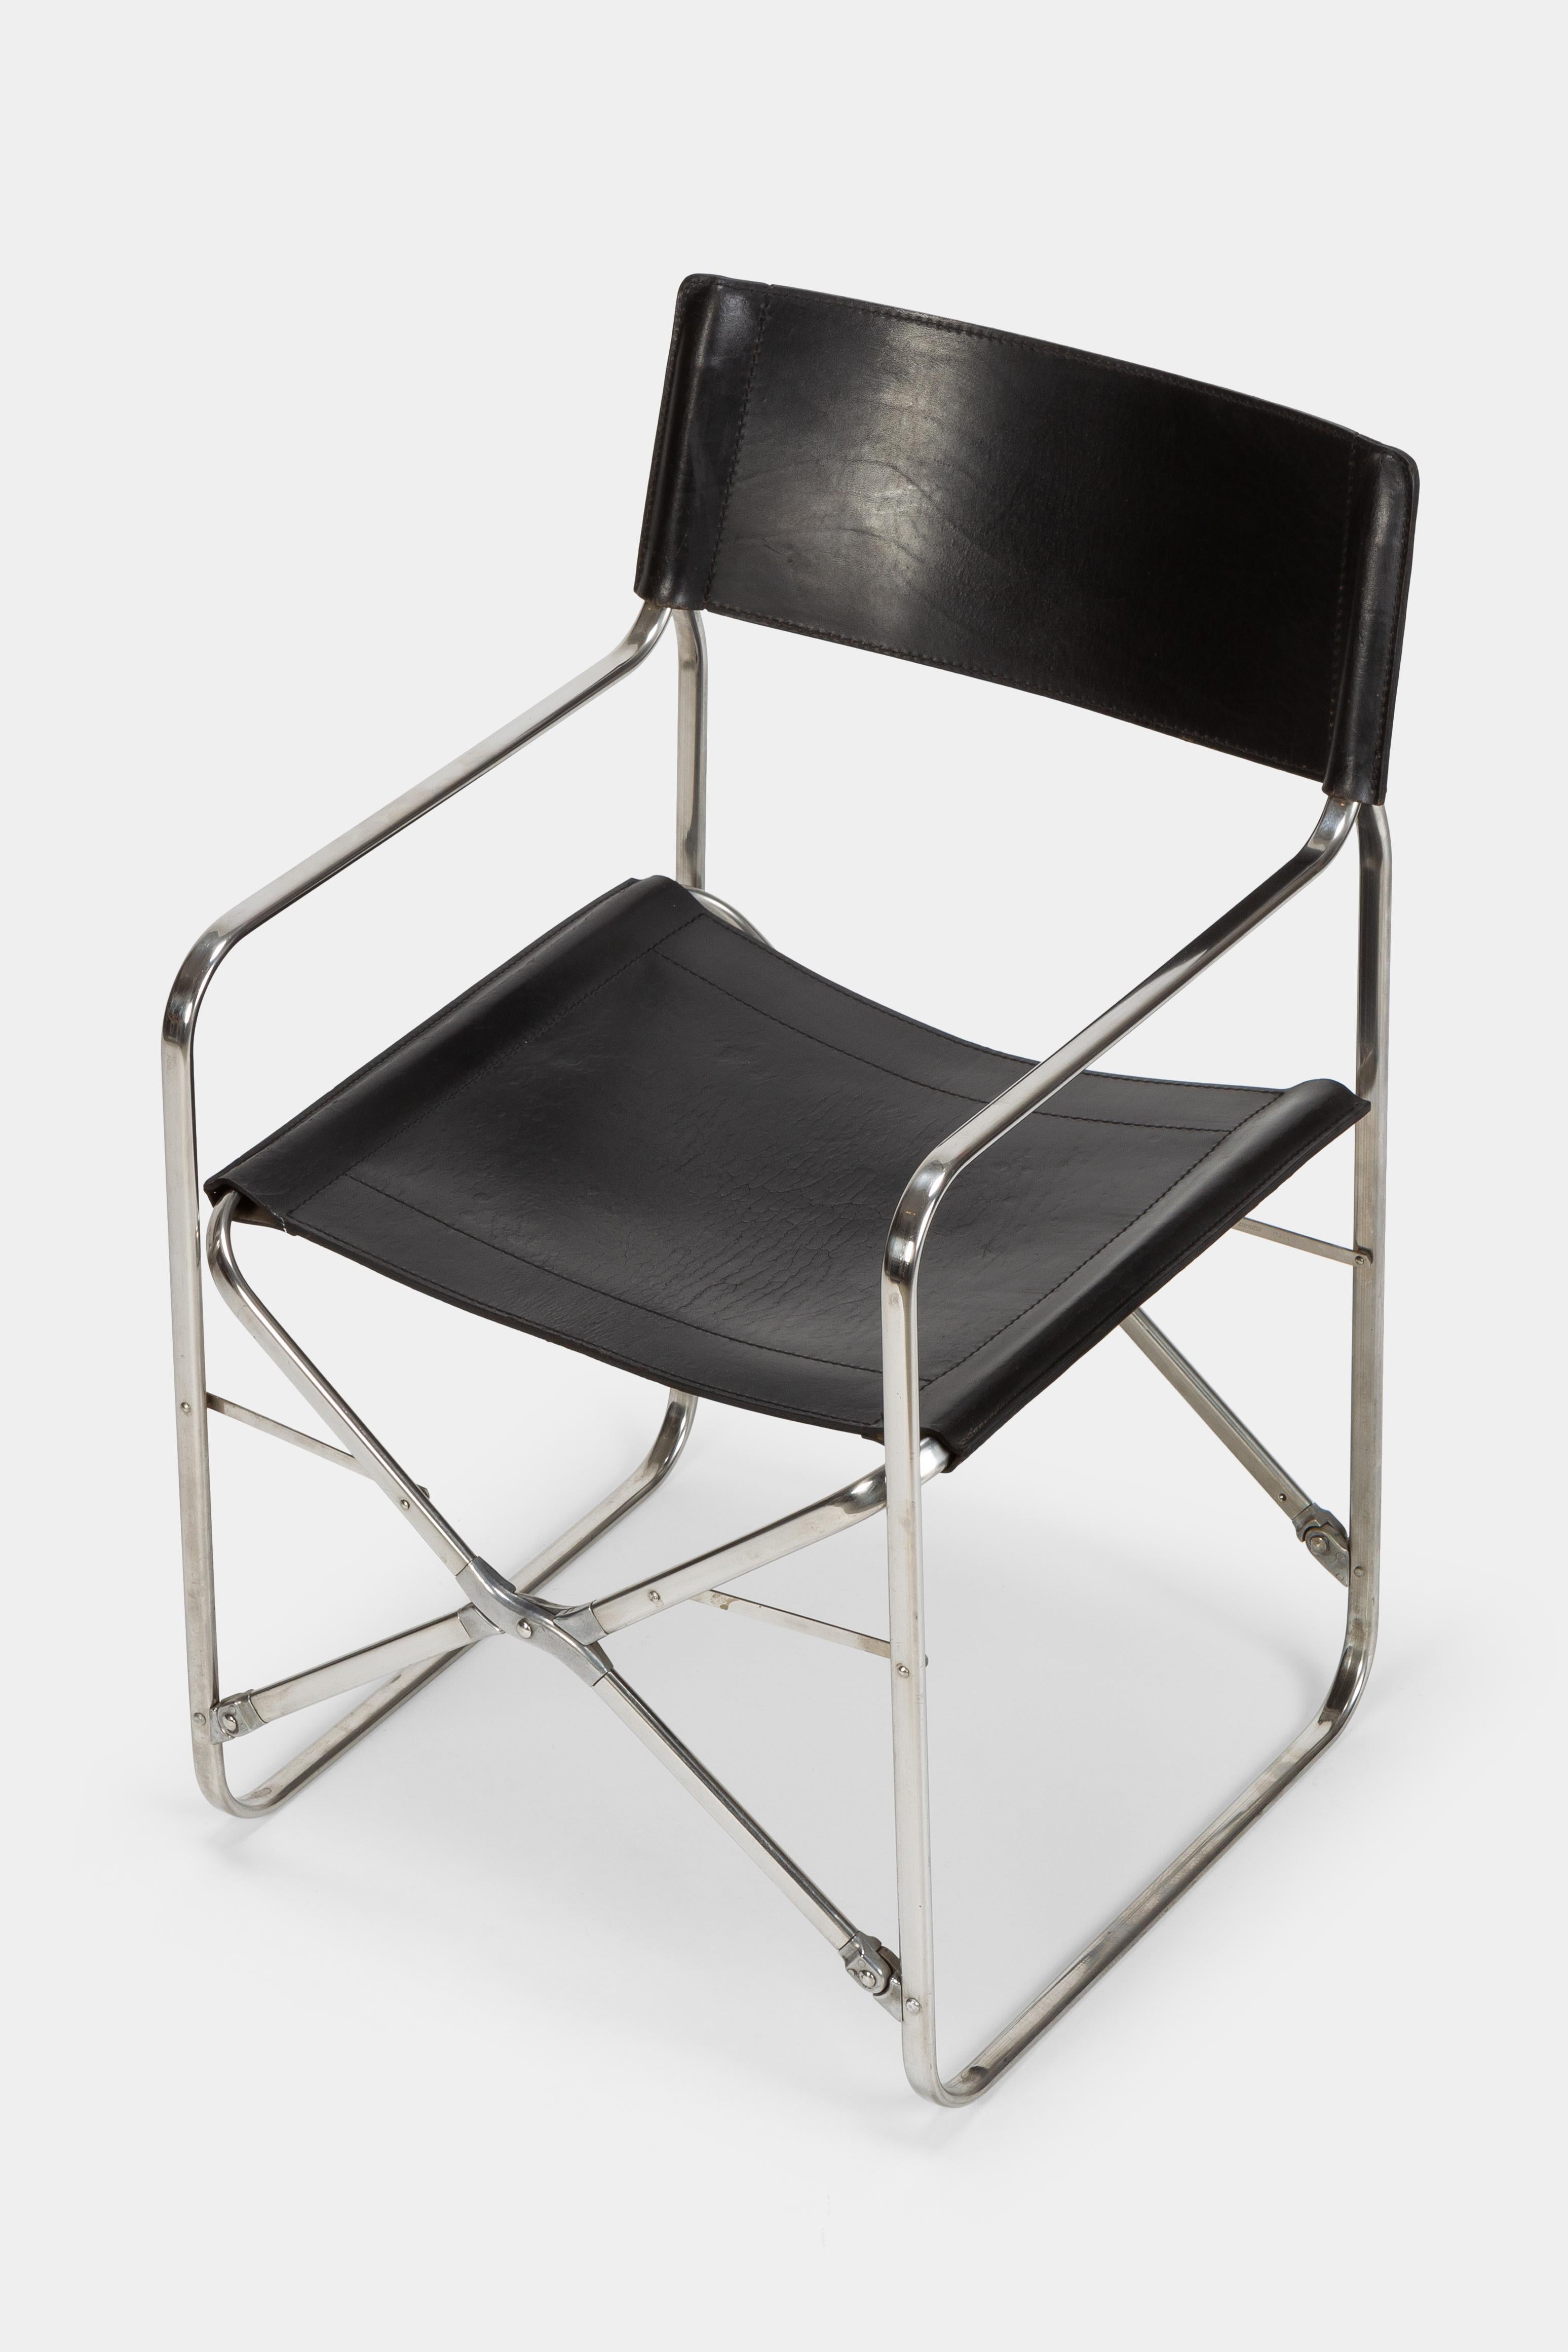 Gae Aulenti folding chair April 2120 manufactured by Zanotta in the 1960s in Italy. Fine black leather attached to a chrome steel frame.